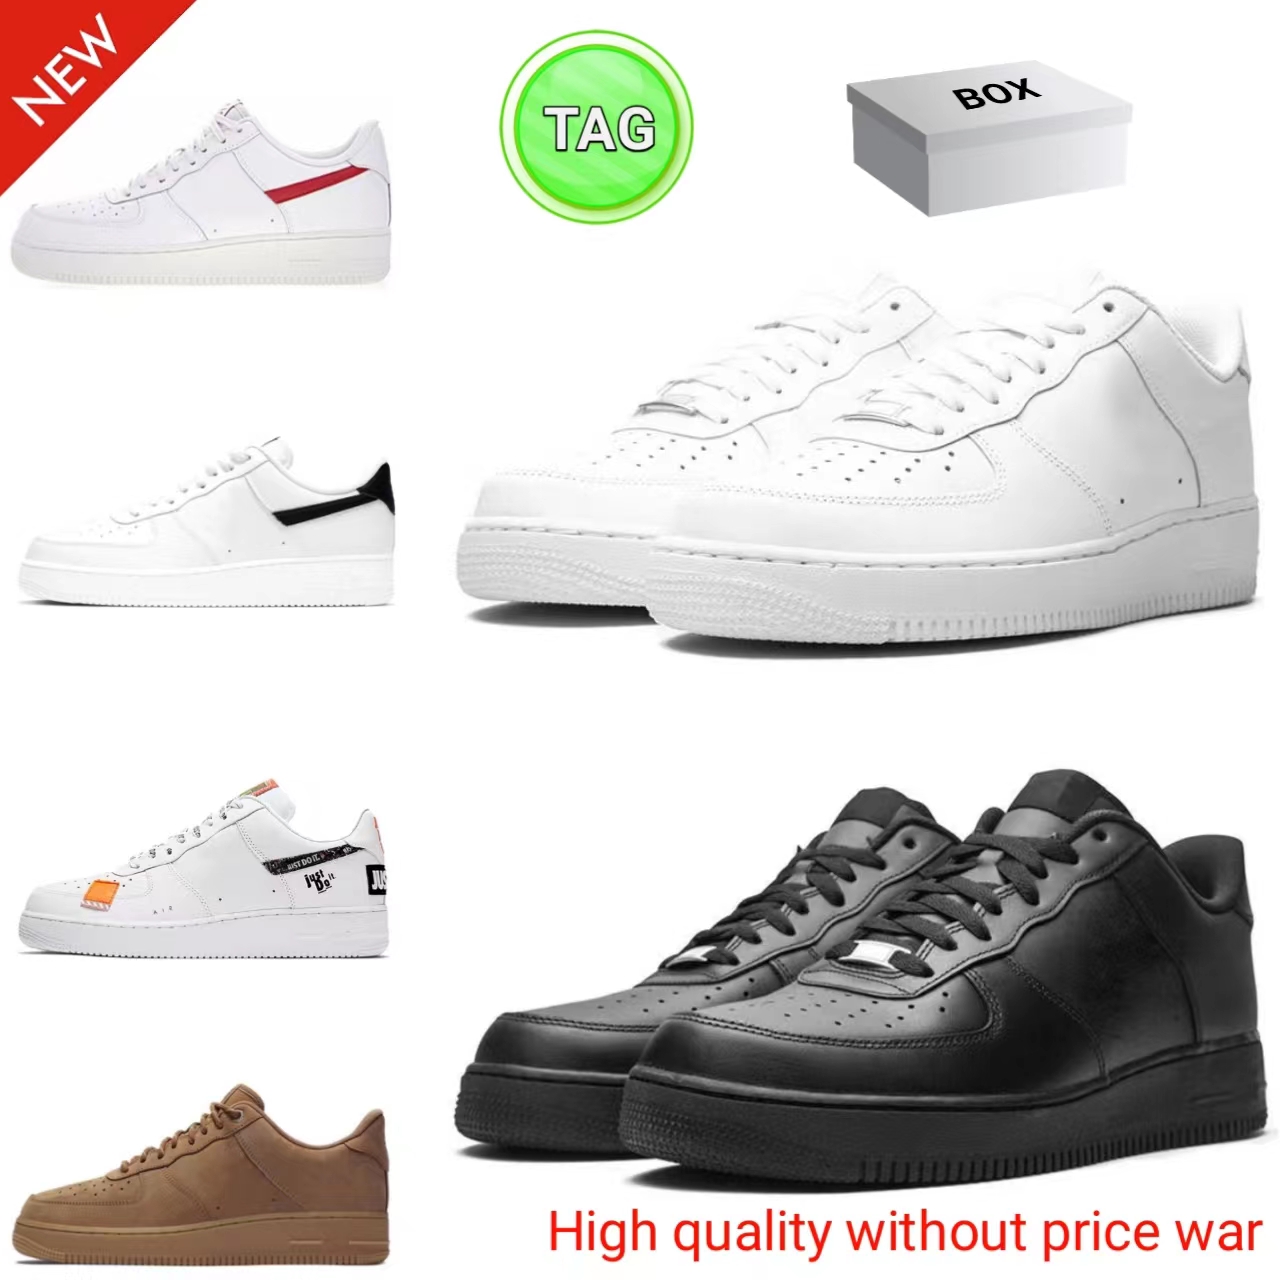 

Designer air force 1 af1 low shadow men women running shoes Triple White Black Fresh Perspective Pale Ivory Pastel Barely Green mens womens trainers sports sneakers, More styles